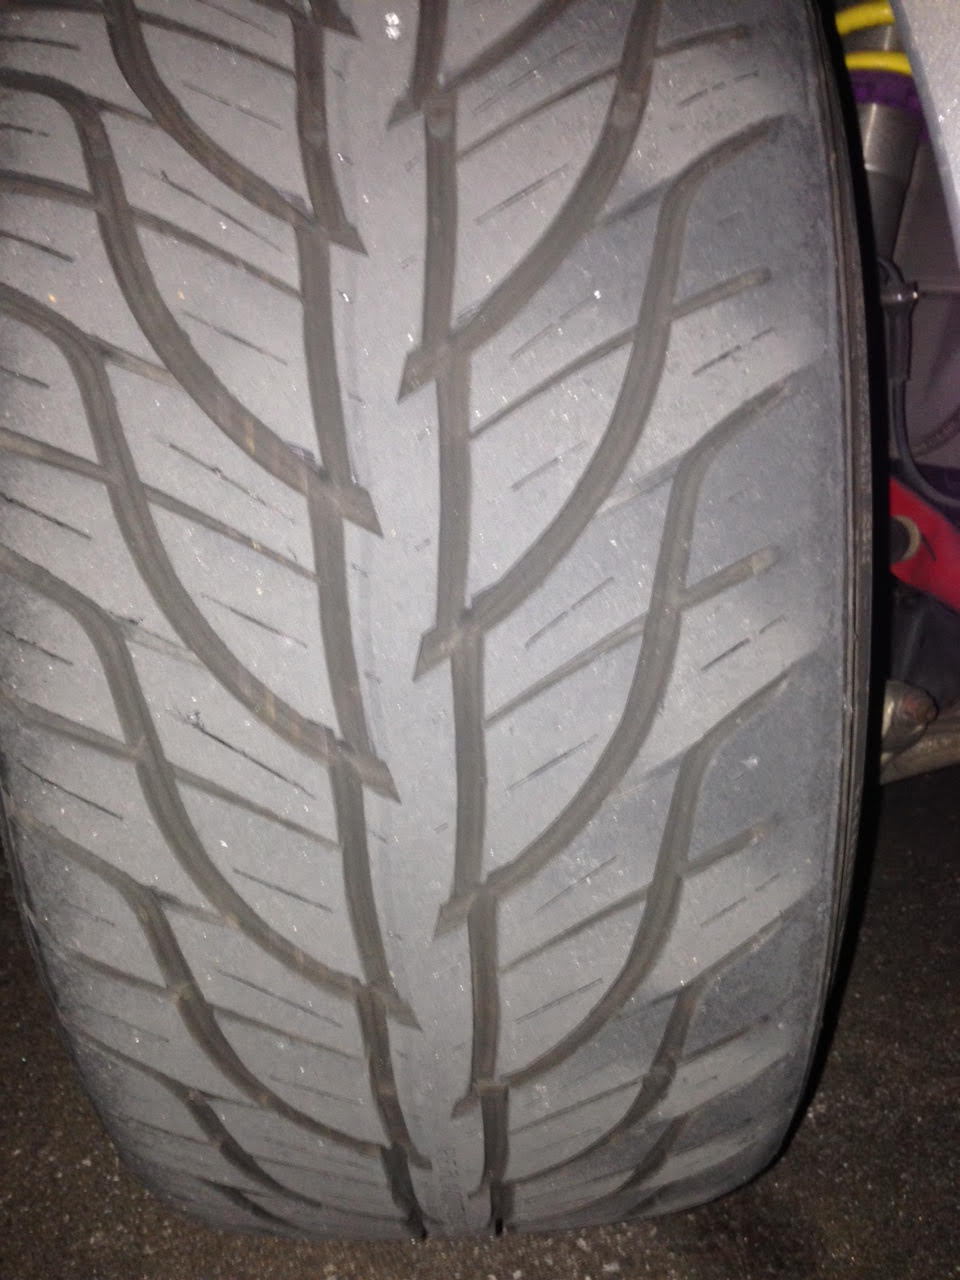 2003 Nissan 350 tire feathering #1